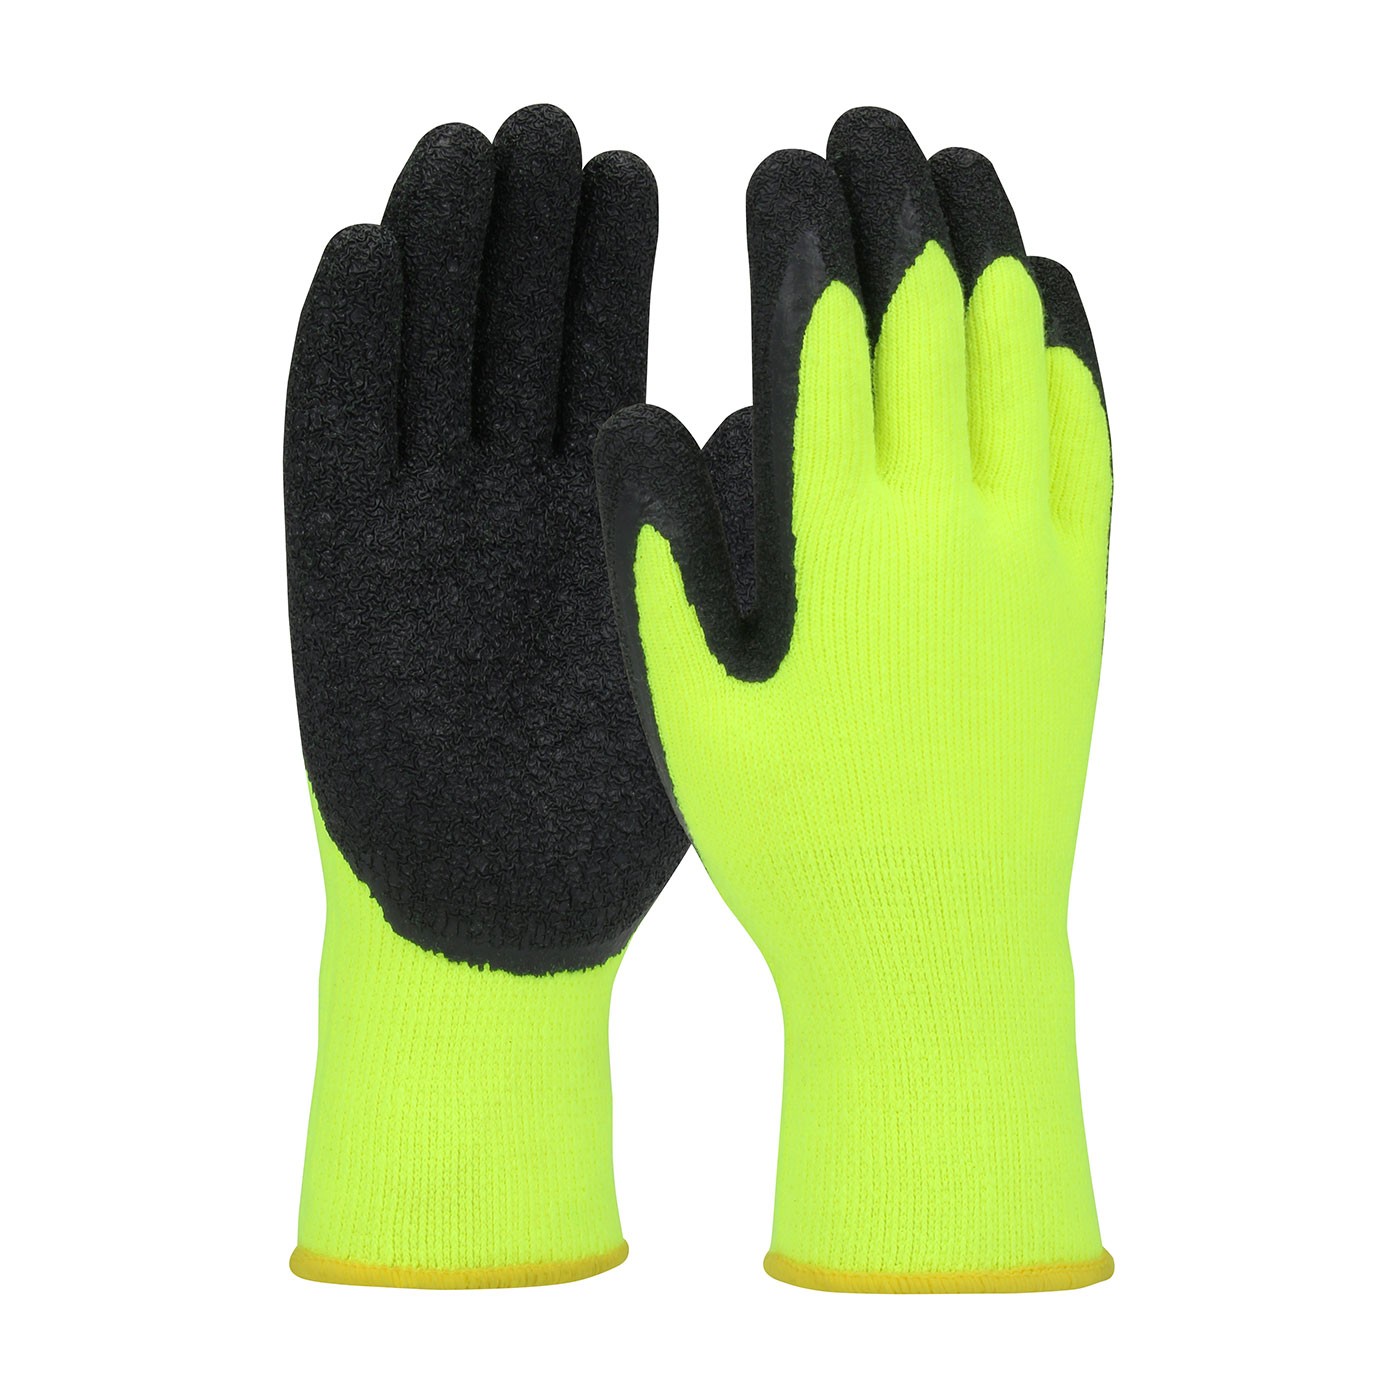 PIP® Economy Hi-Vis Seamless Knit Acrylic Glove with Latex Coated Crinkle Grip on Palm & Fingers  (#41-1425)